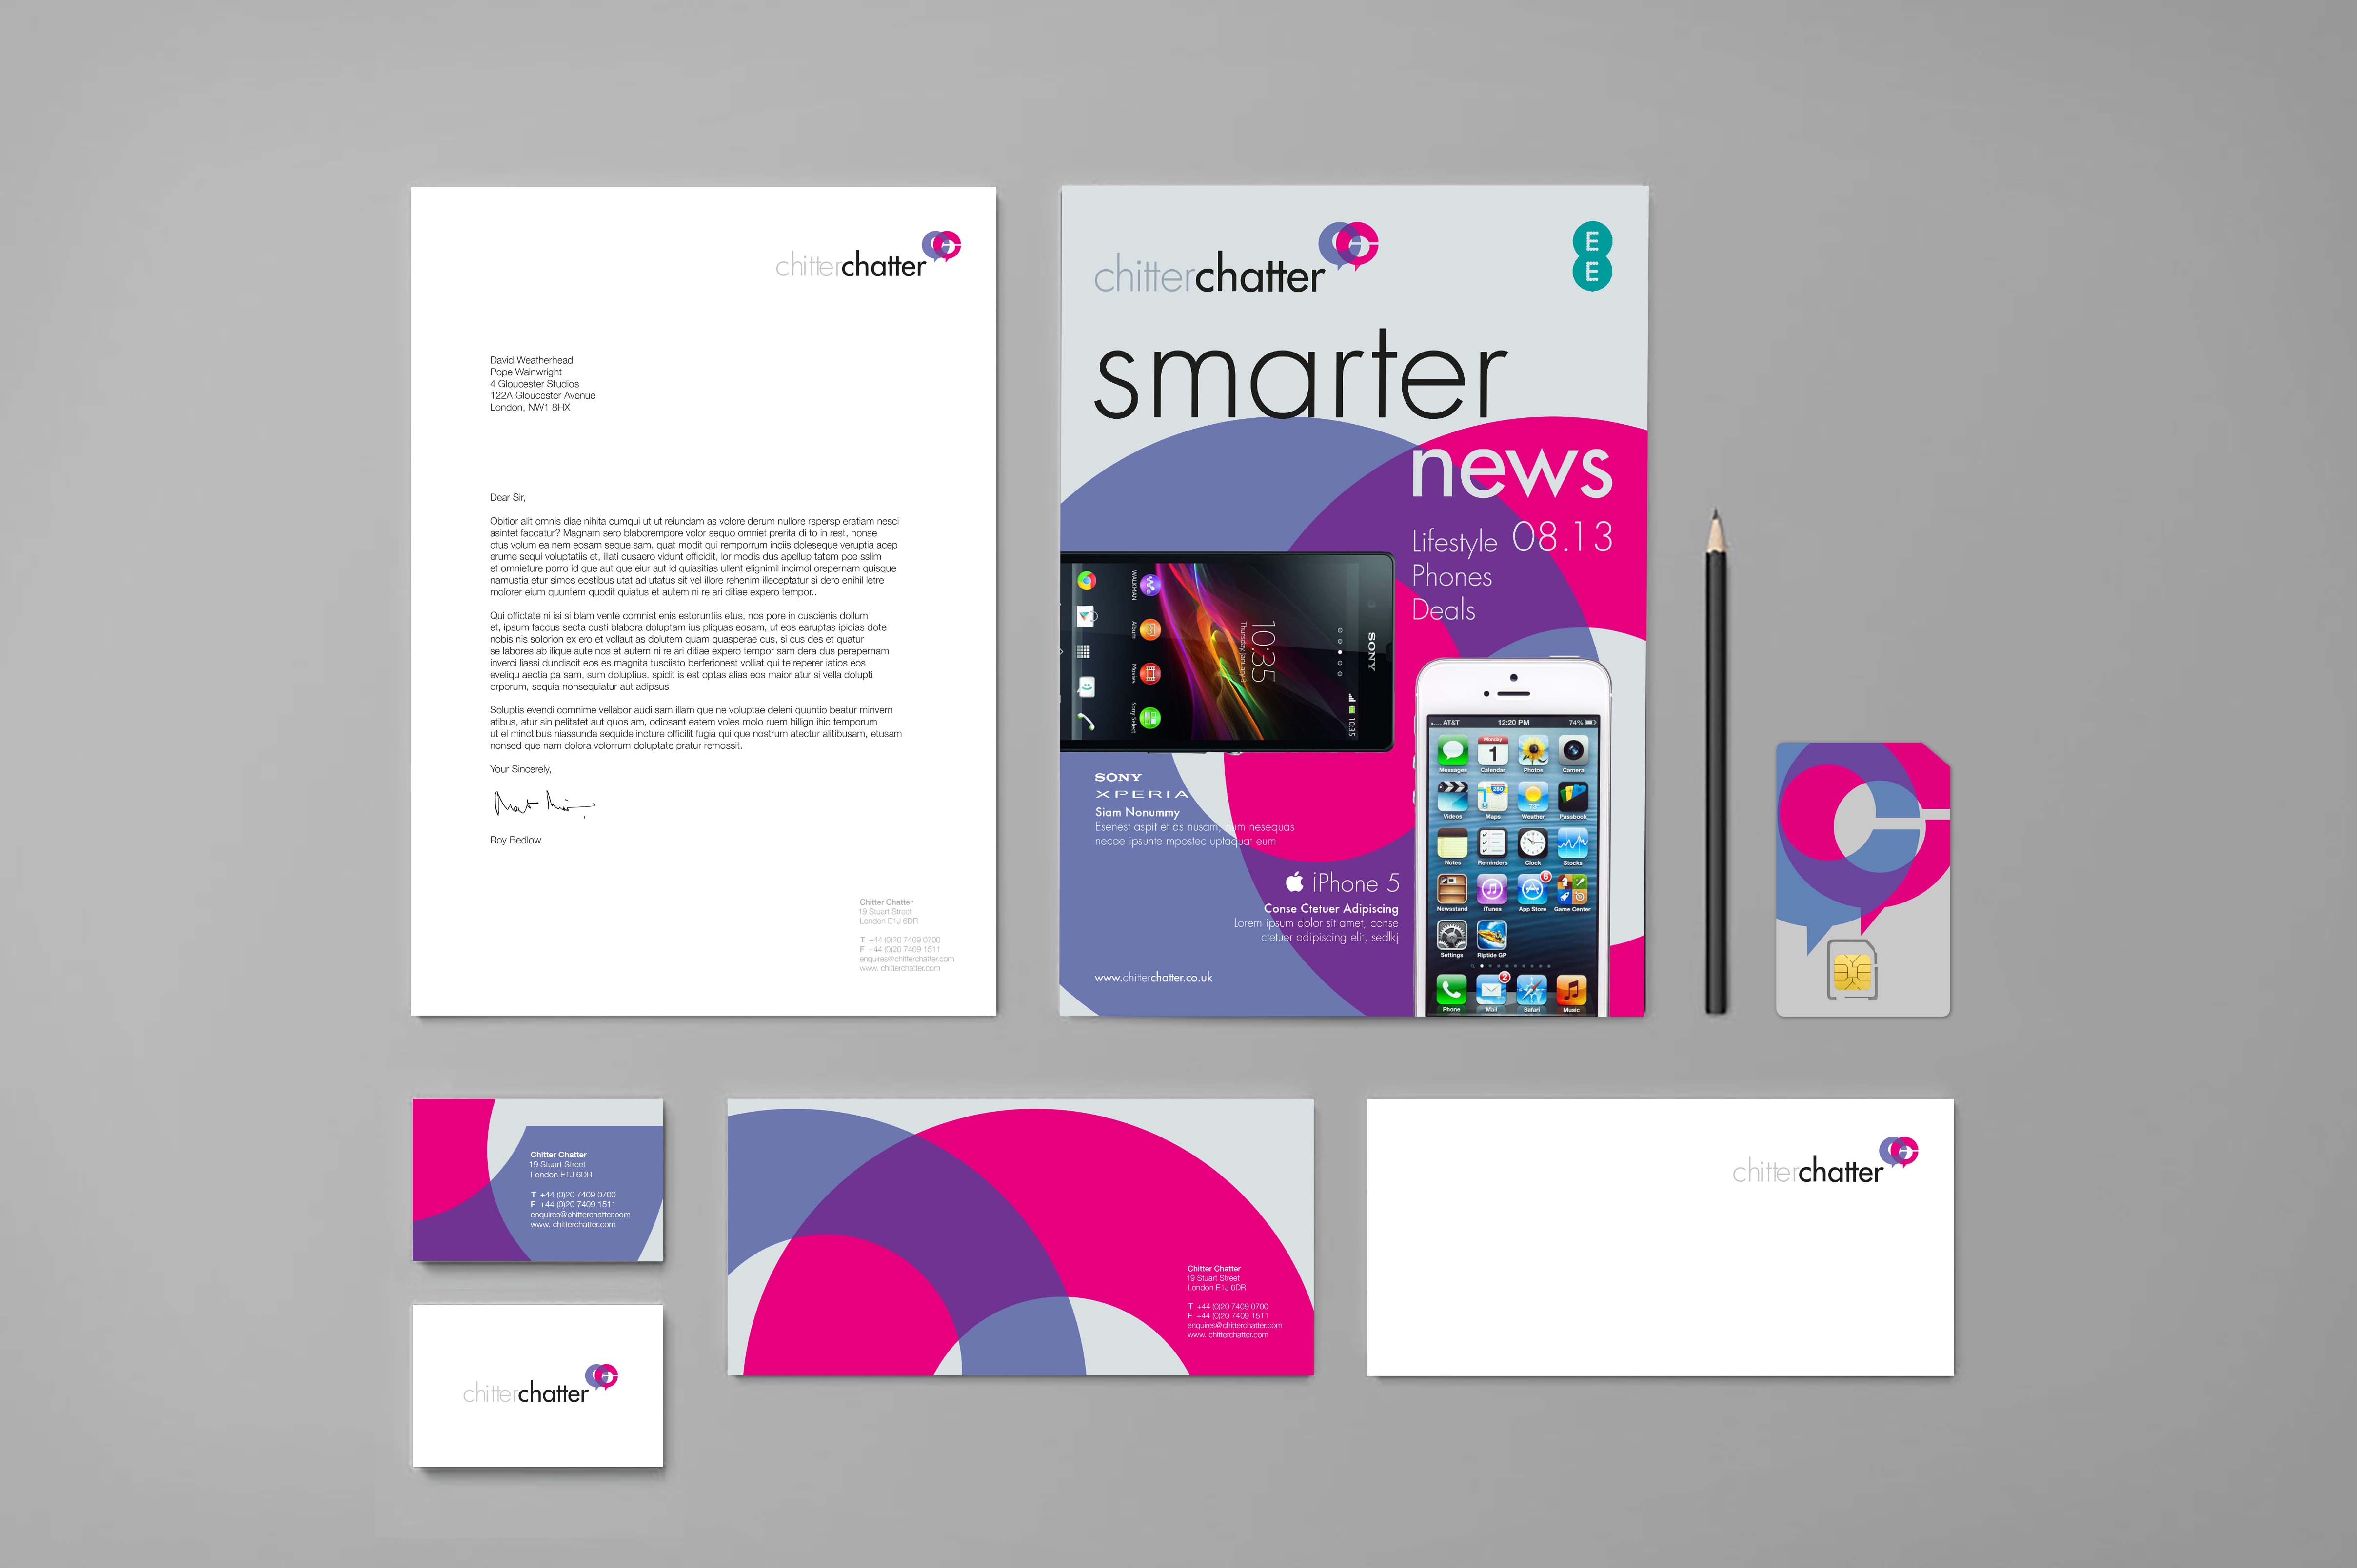 Pic.: Chitter and Chatter visual identity and marketing materials